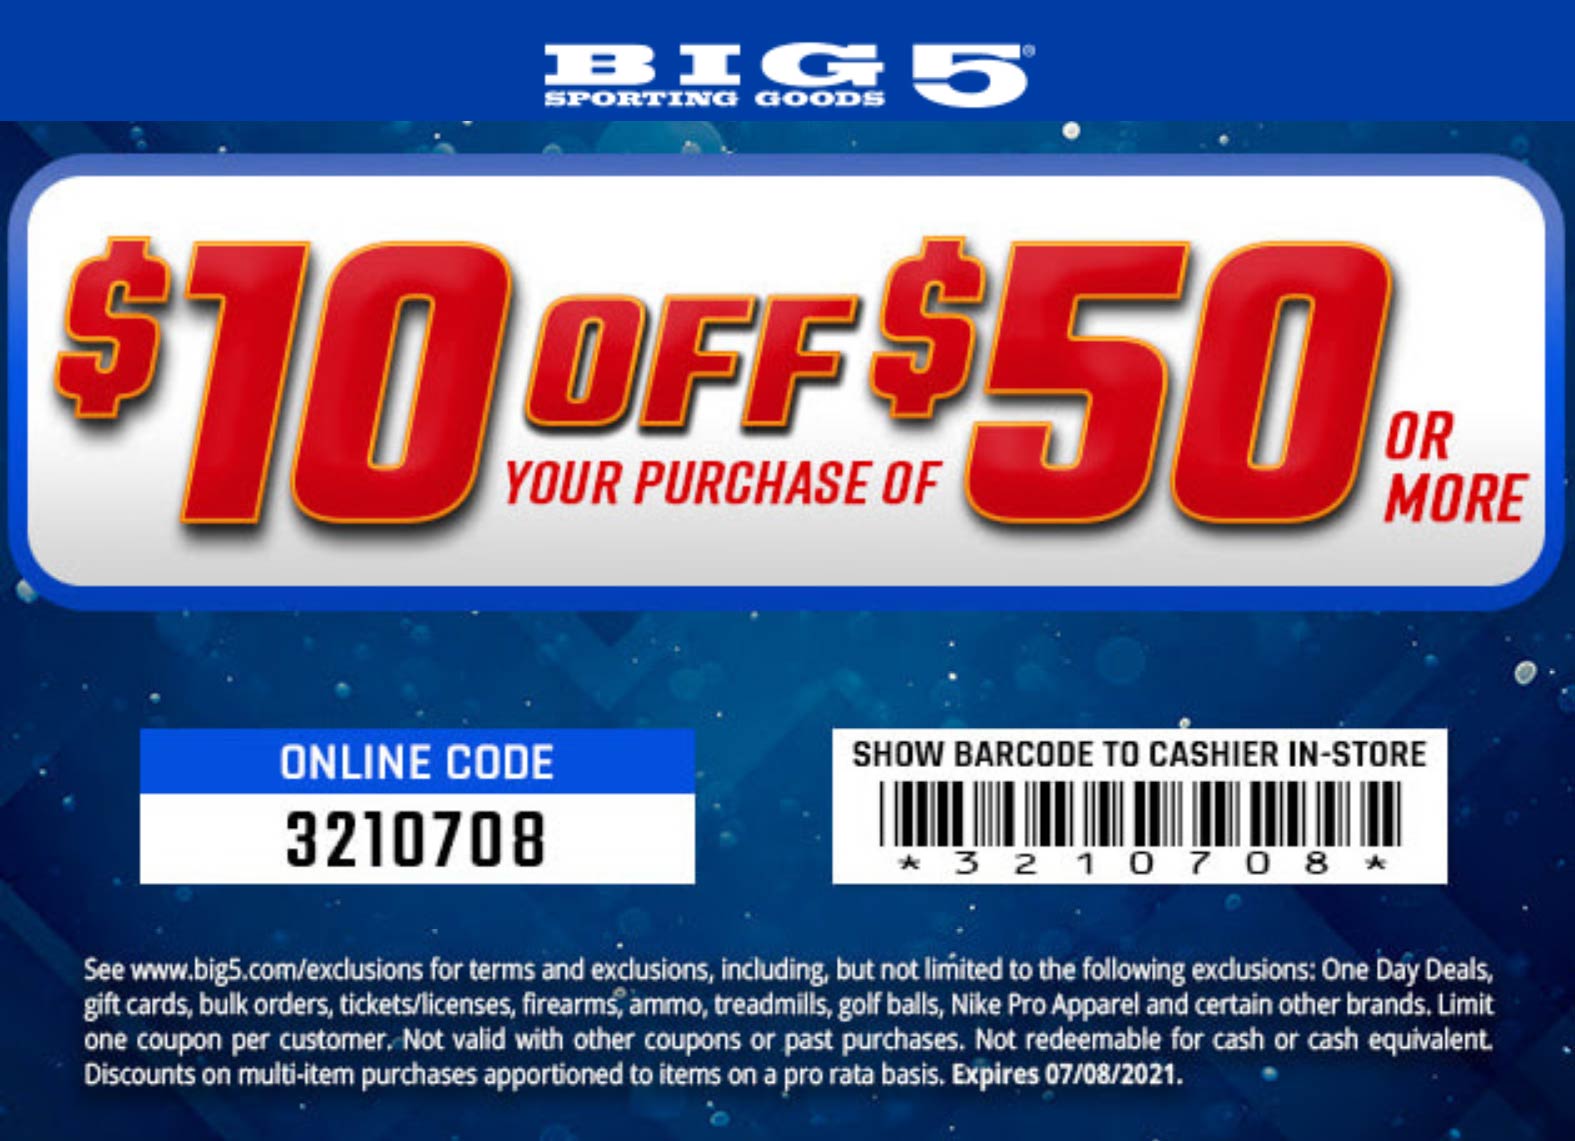 10 off 50 today at Big 5 sporting goods, or online via promo code